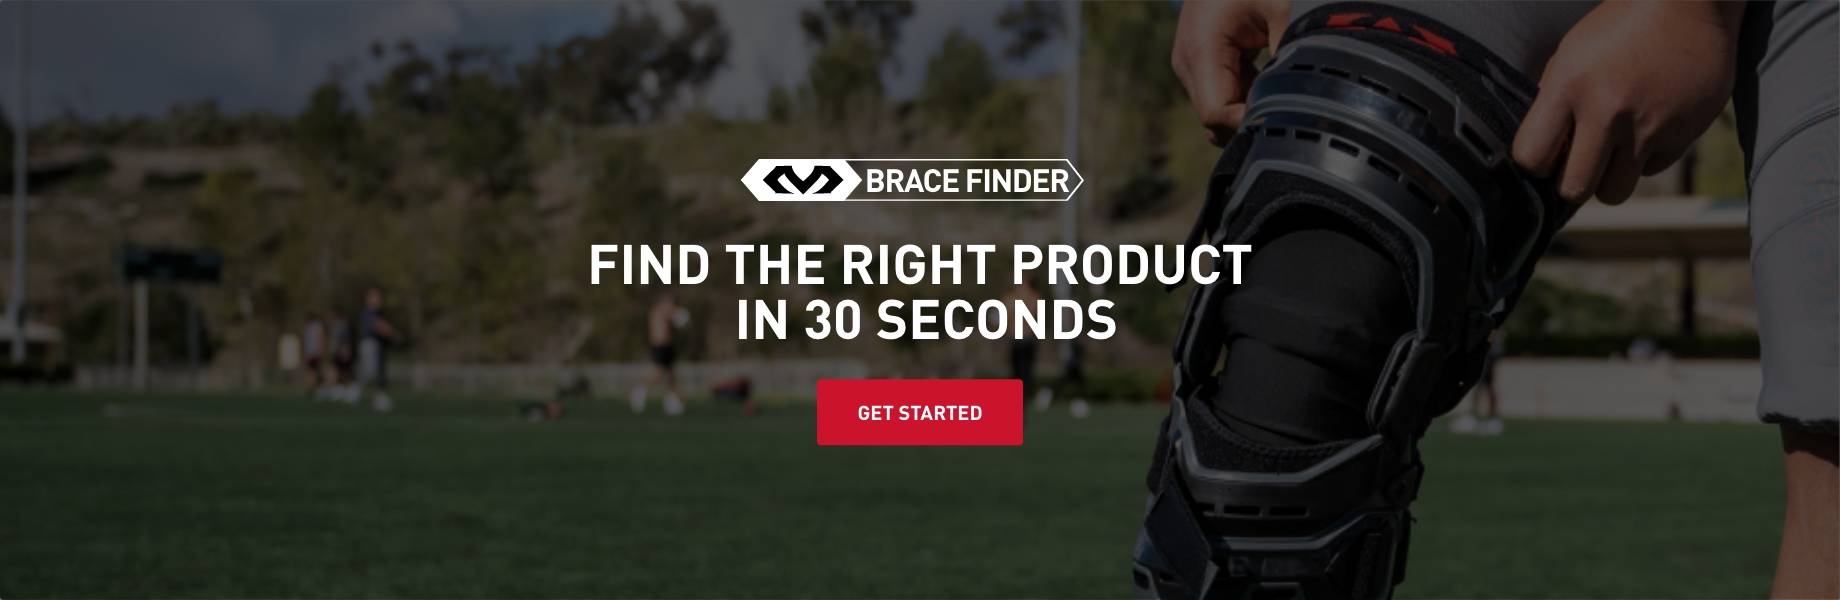 Brace Finder. Find the right product in 30 seconds. GET STARTED